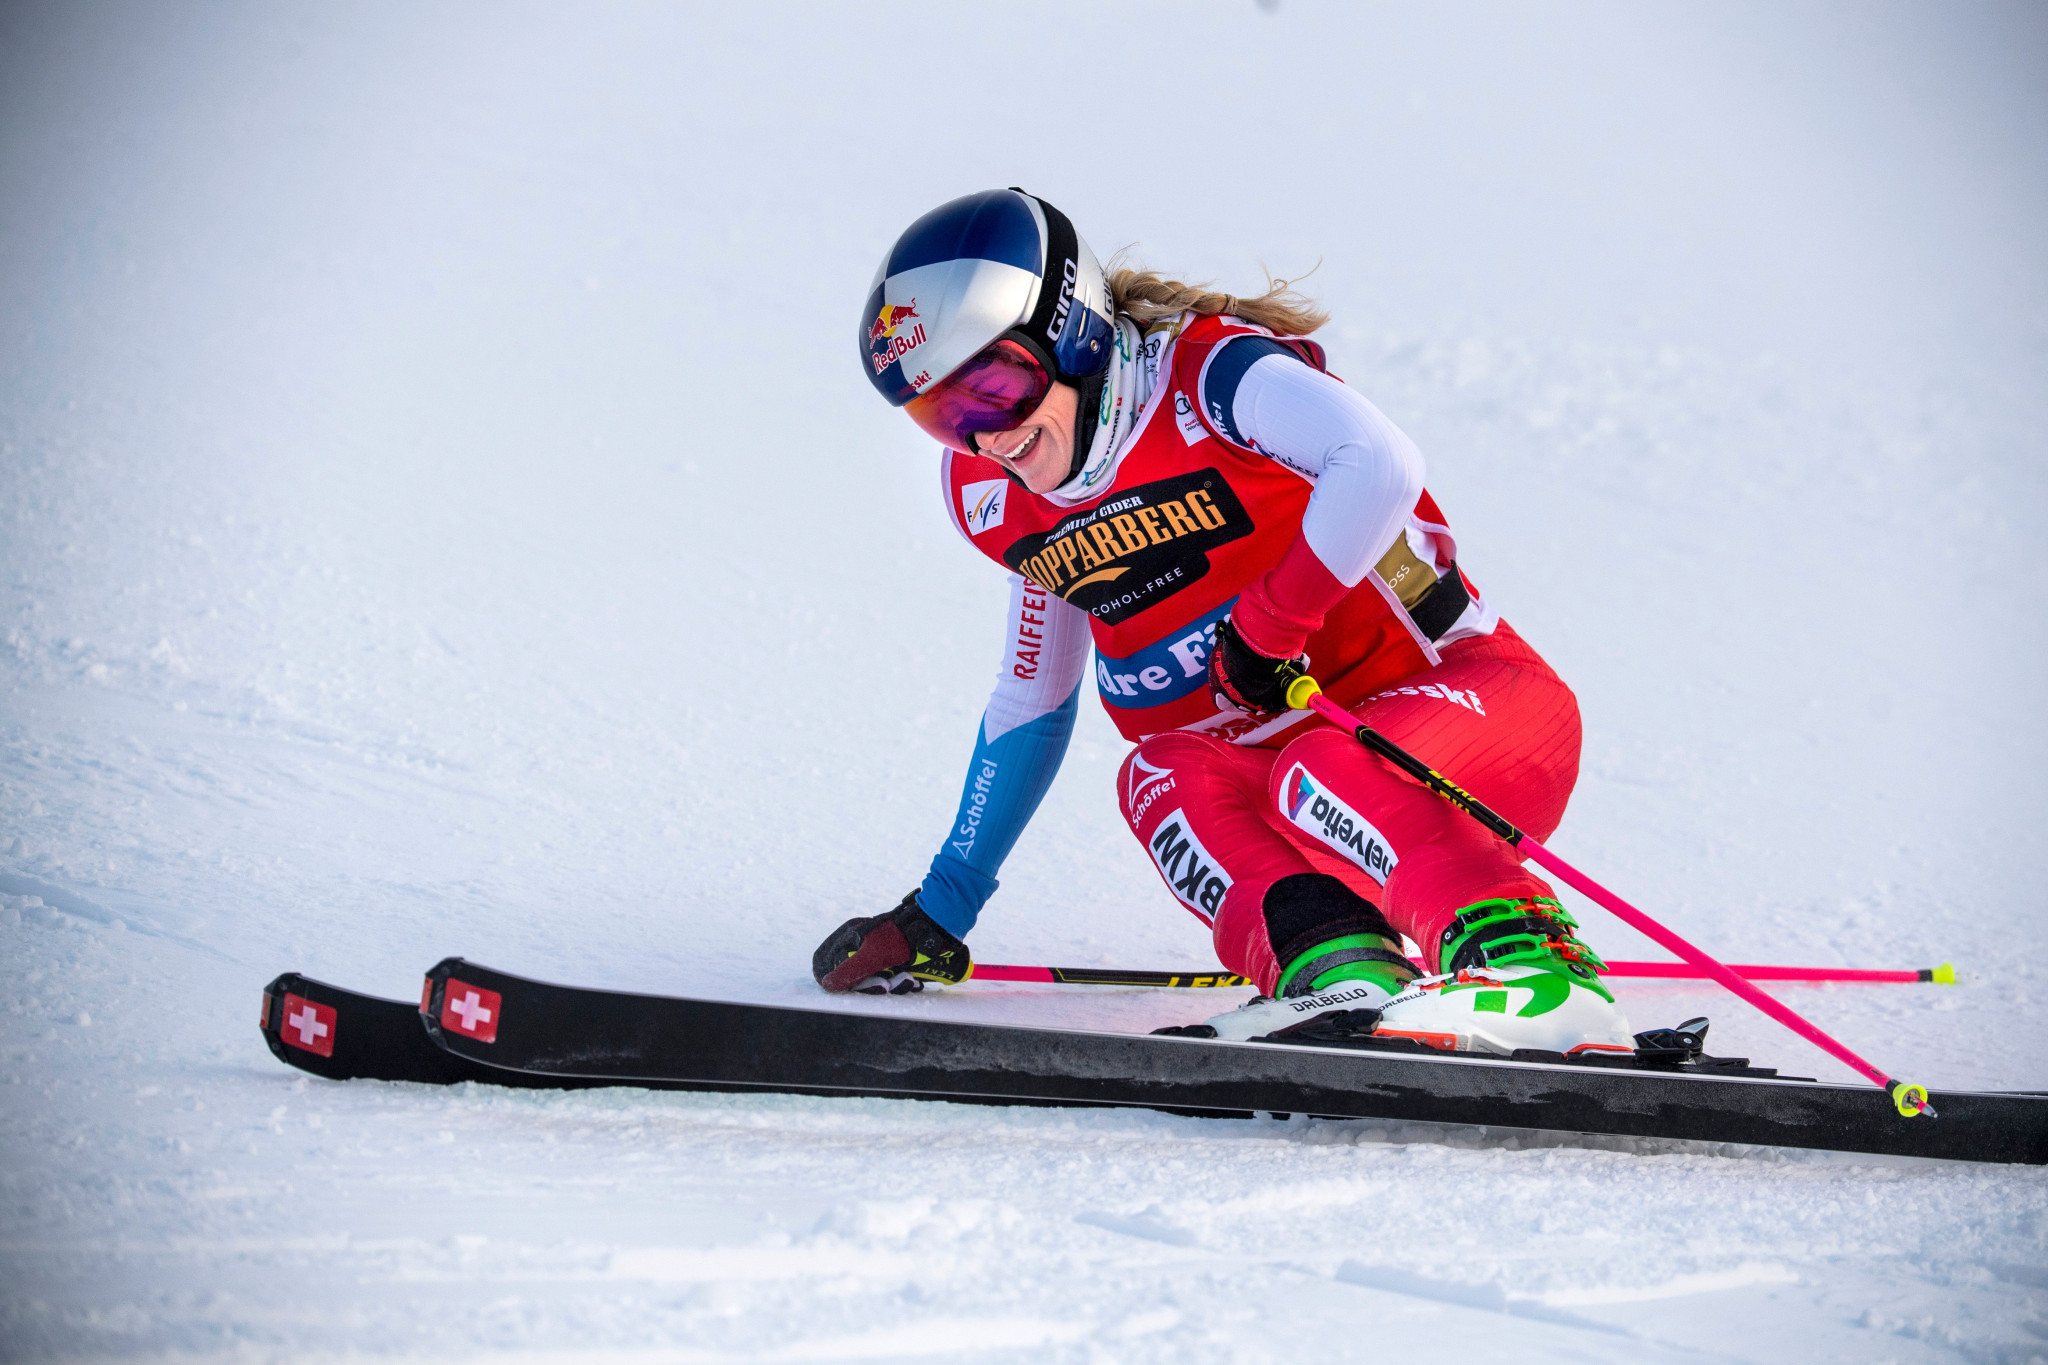 Smith tops qualification at FIS Ski Cross World Cup in Reiteralm